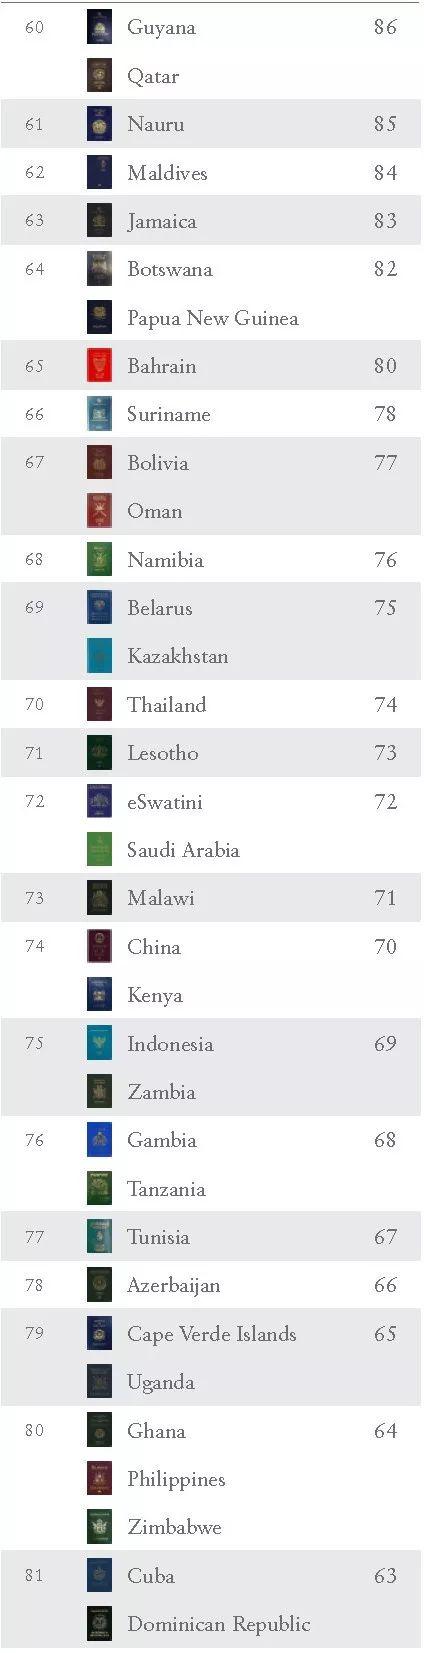 check! world’s most powerful passports list 2019 revealed!